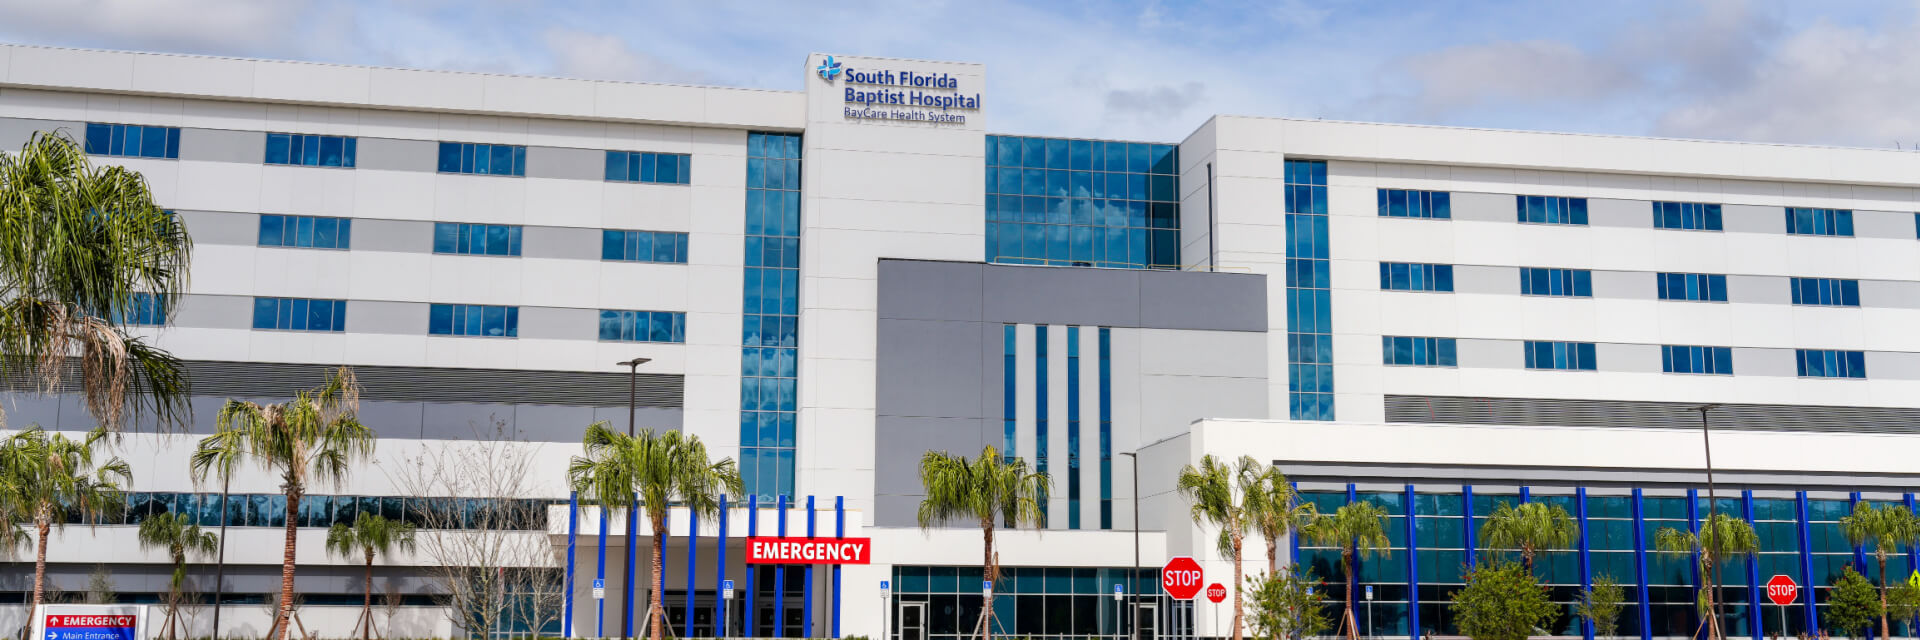 Exterior of the new South Florida Baptist Hospital in Plant City, FL.